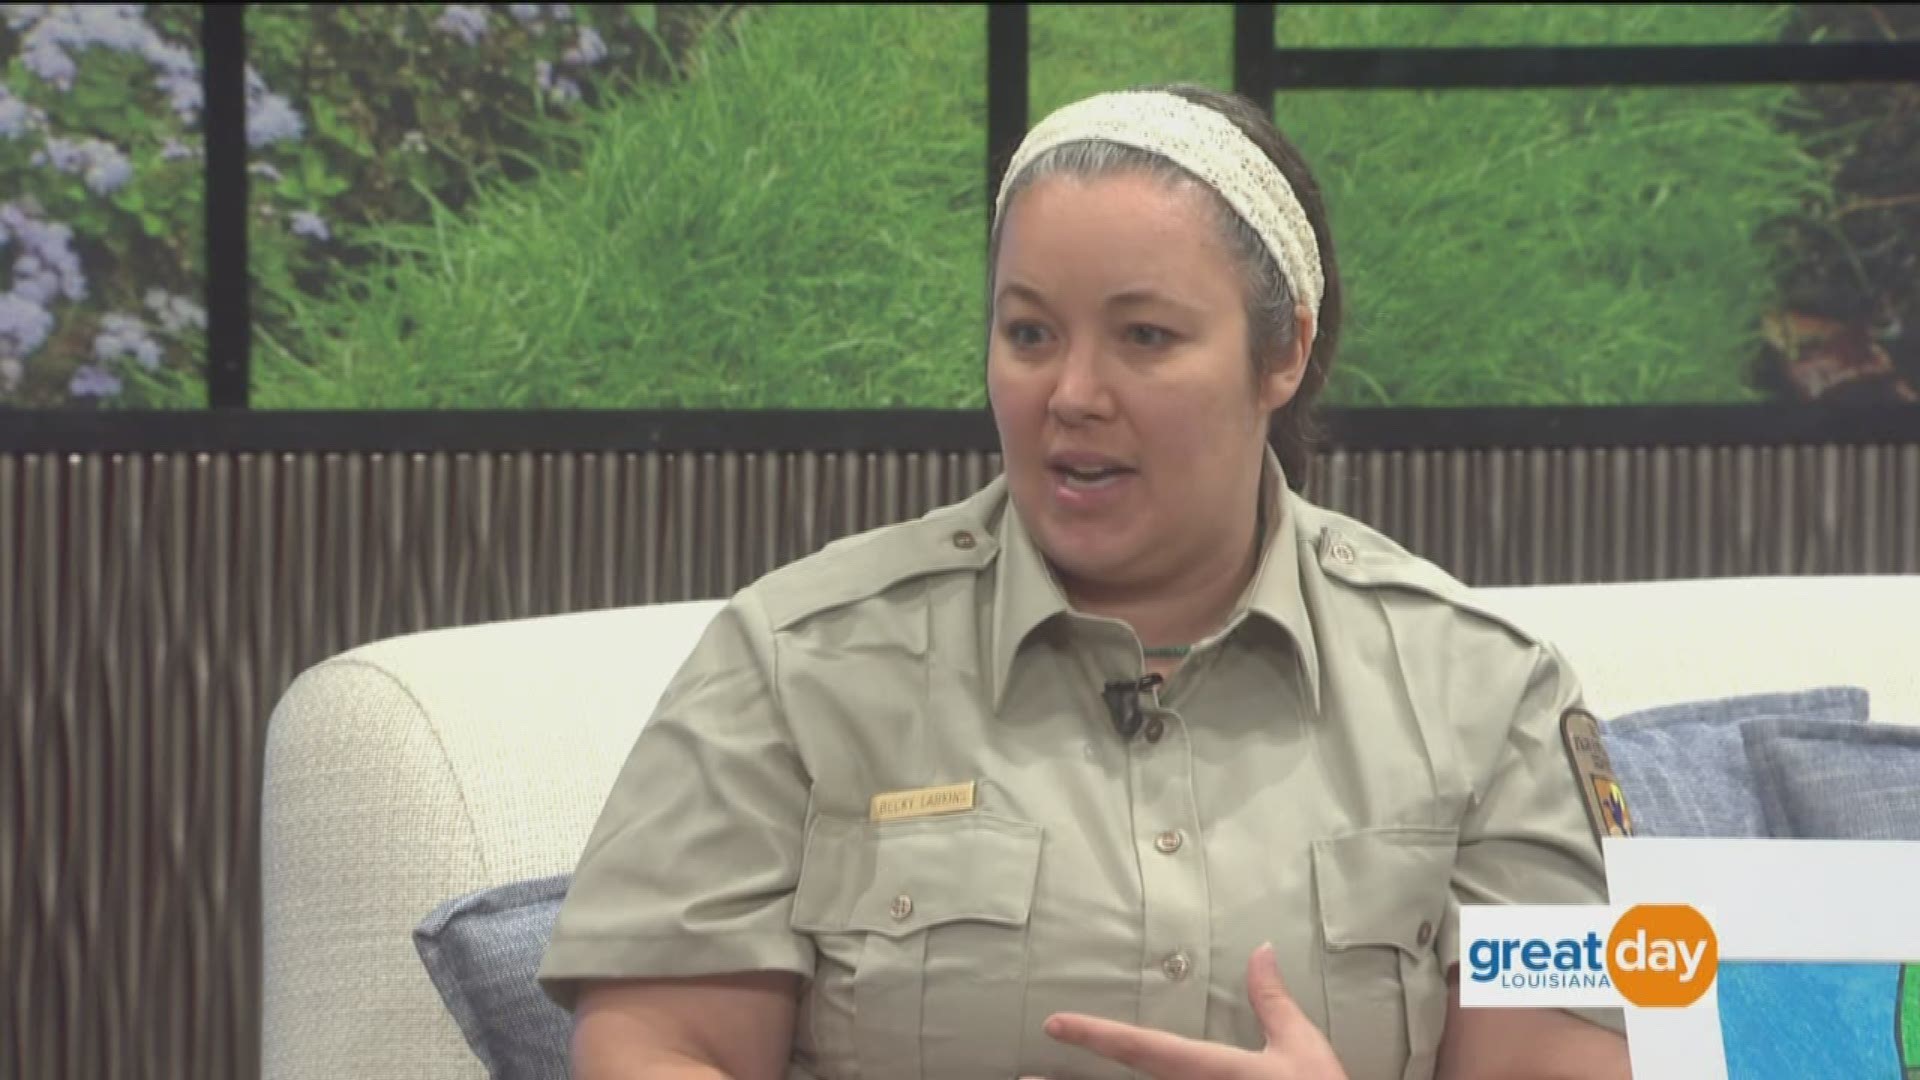 Becky Larkins with the US Fish and Wildlife Service tells us about "Work/Play Days" happening September 14th and October 5th at SELA National Wildlife Refuges.